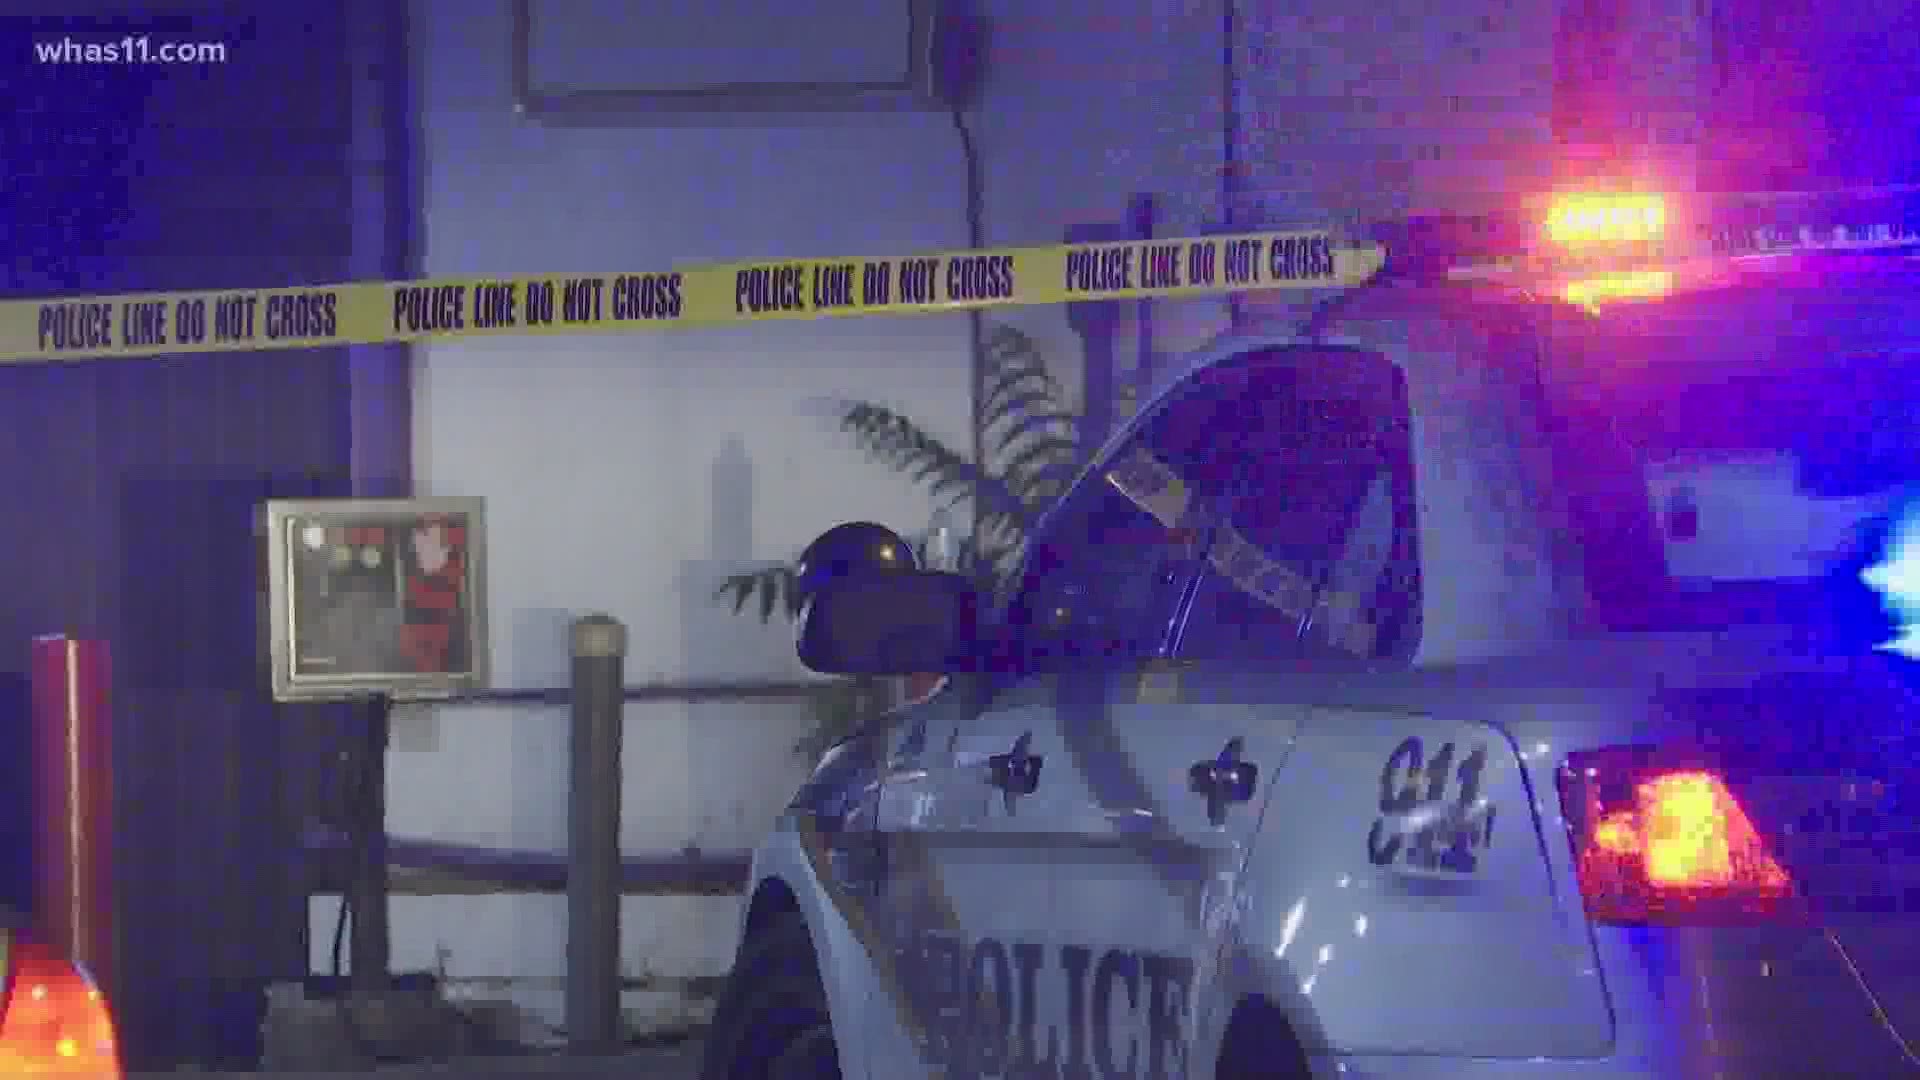 A man in his 20s was shot and killed late Thursday night. Police are still looking for suspects.